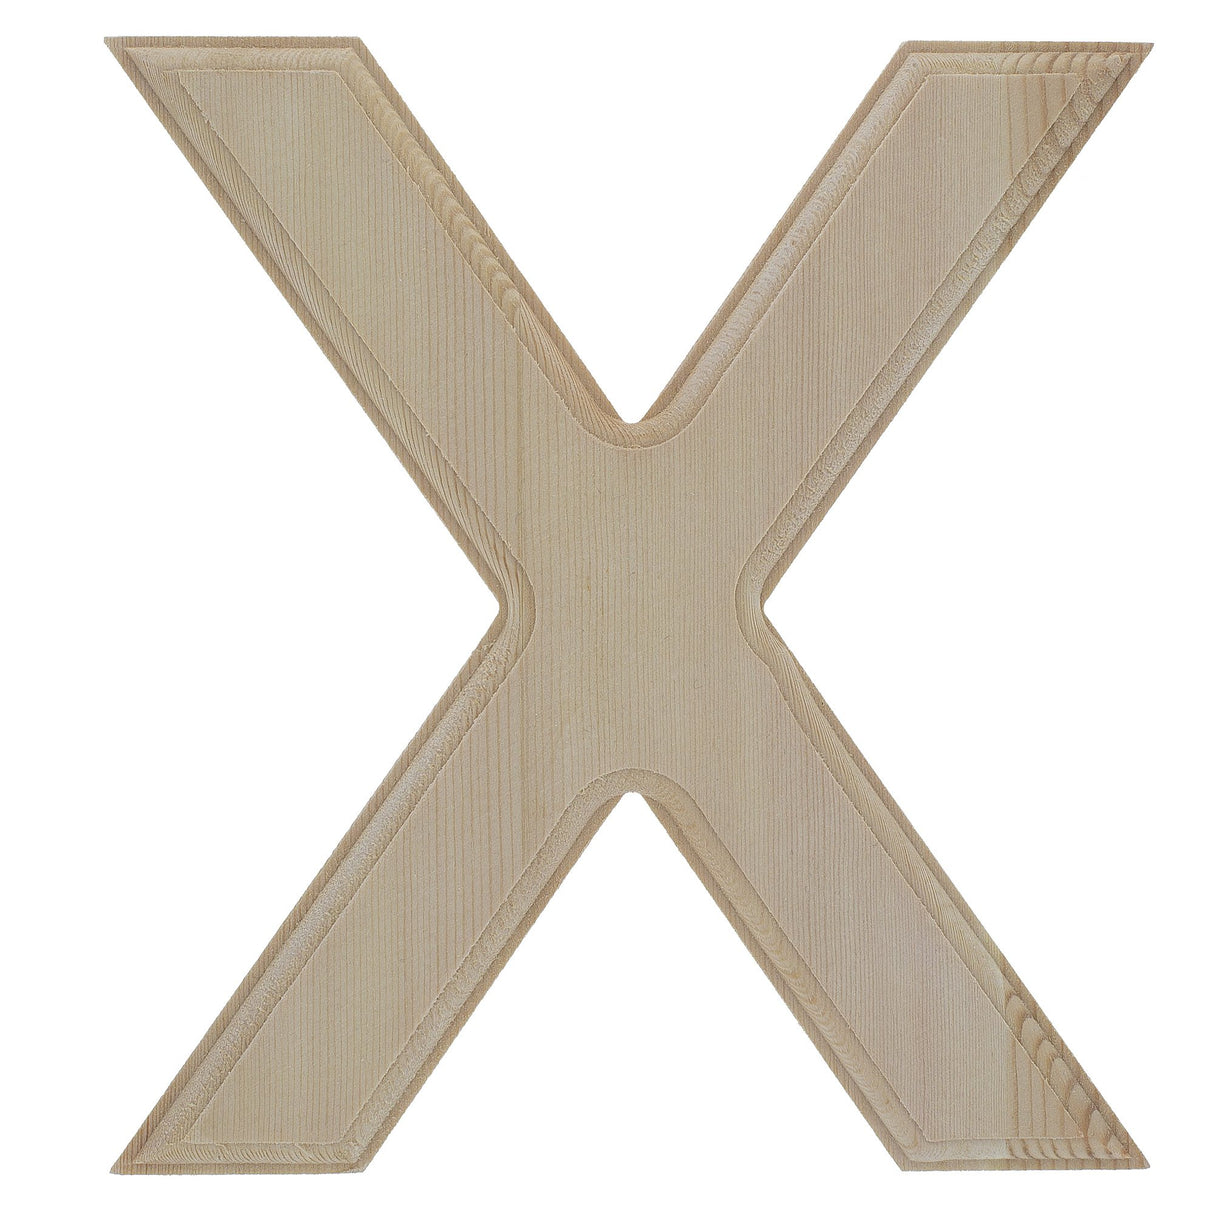 Wood Unfinished Wooden Arial Font Letter X (6.25 Inches) in Beige color